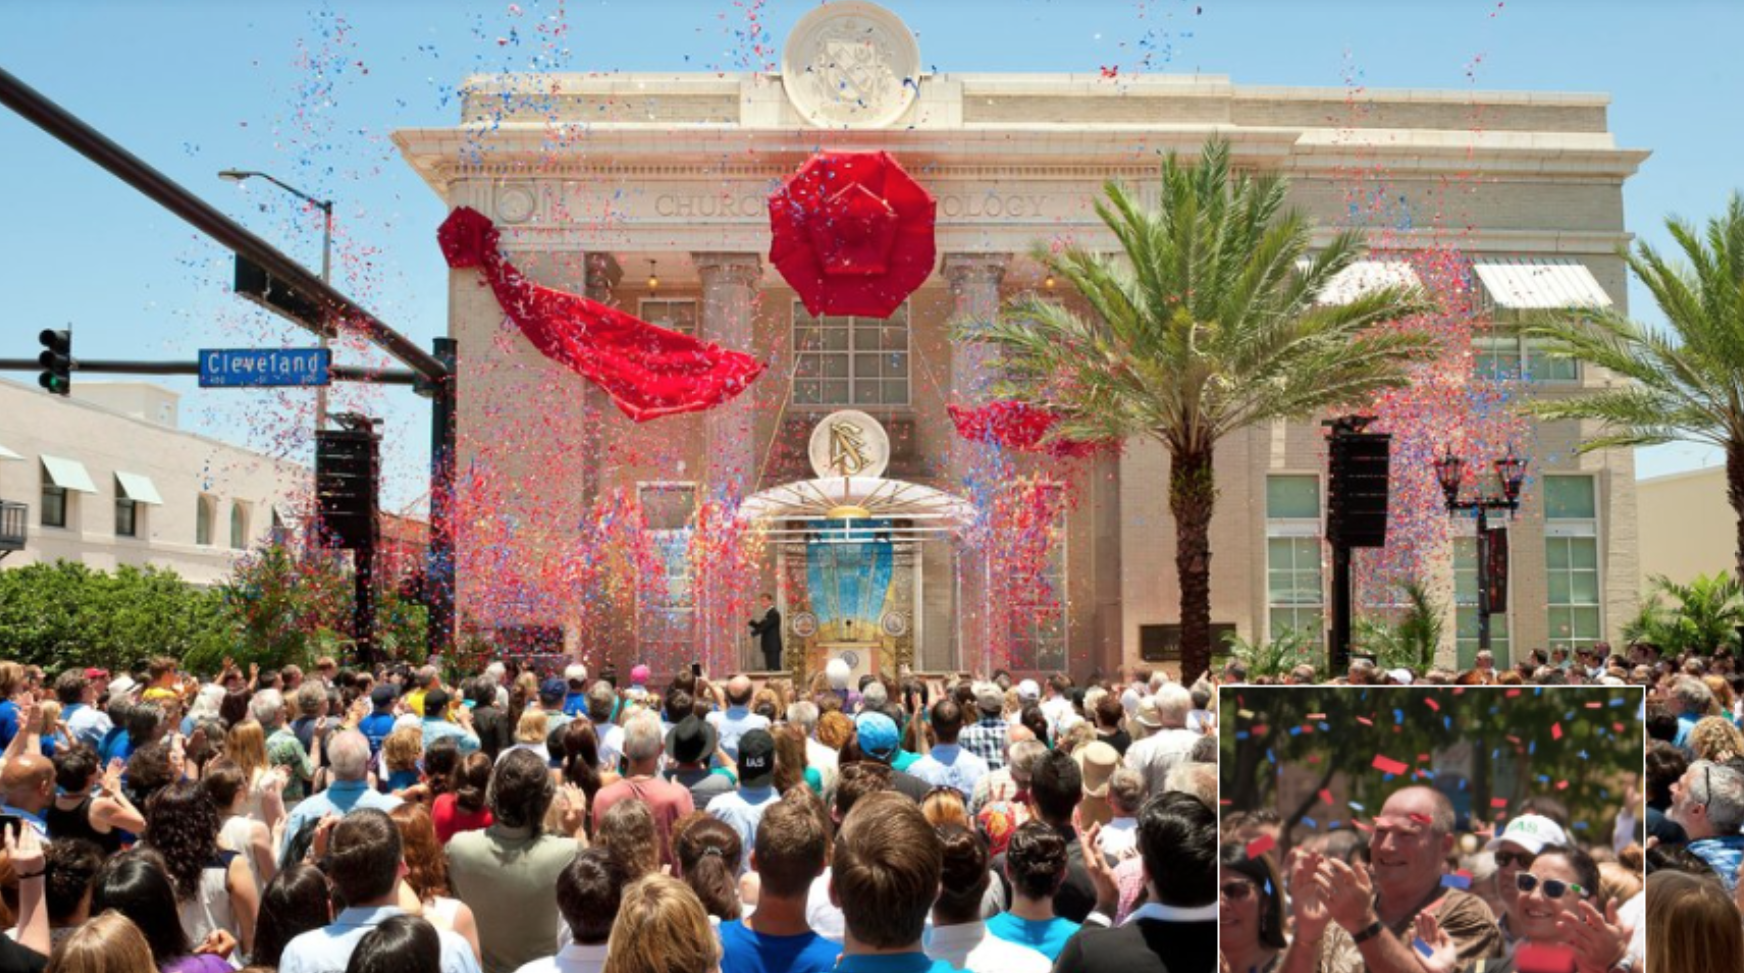 confetti cannons  for Scientology in tampa